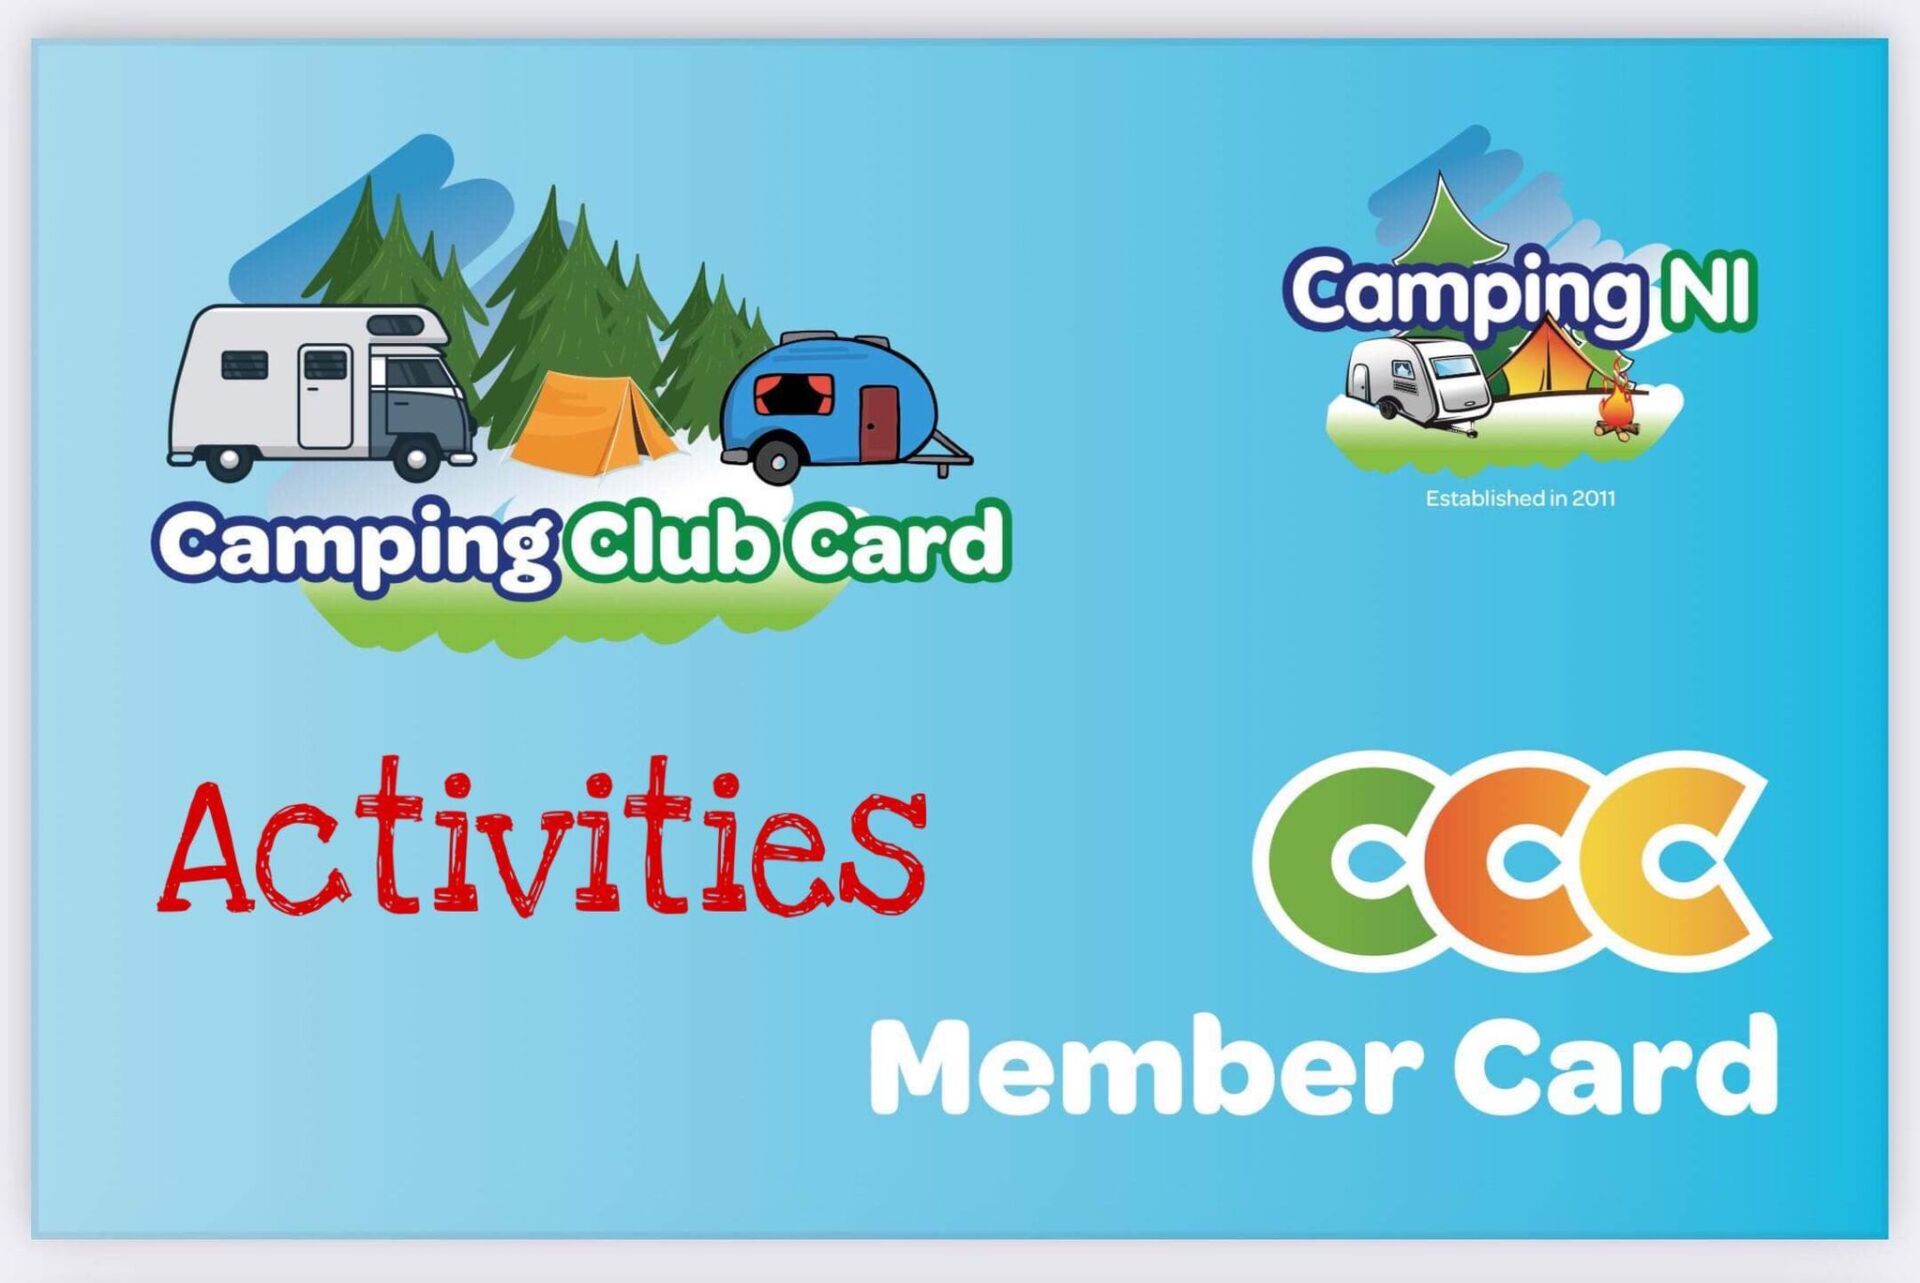 Club discounts on actvities CampingNI